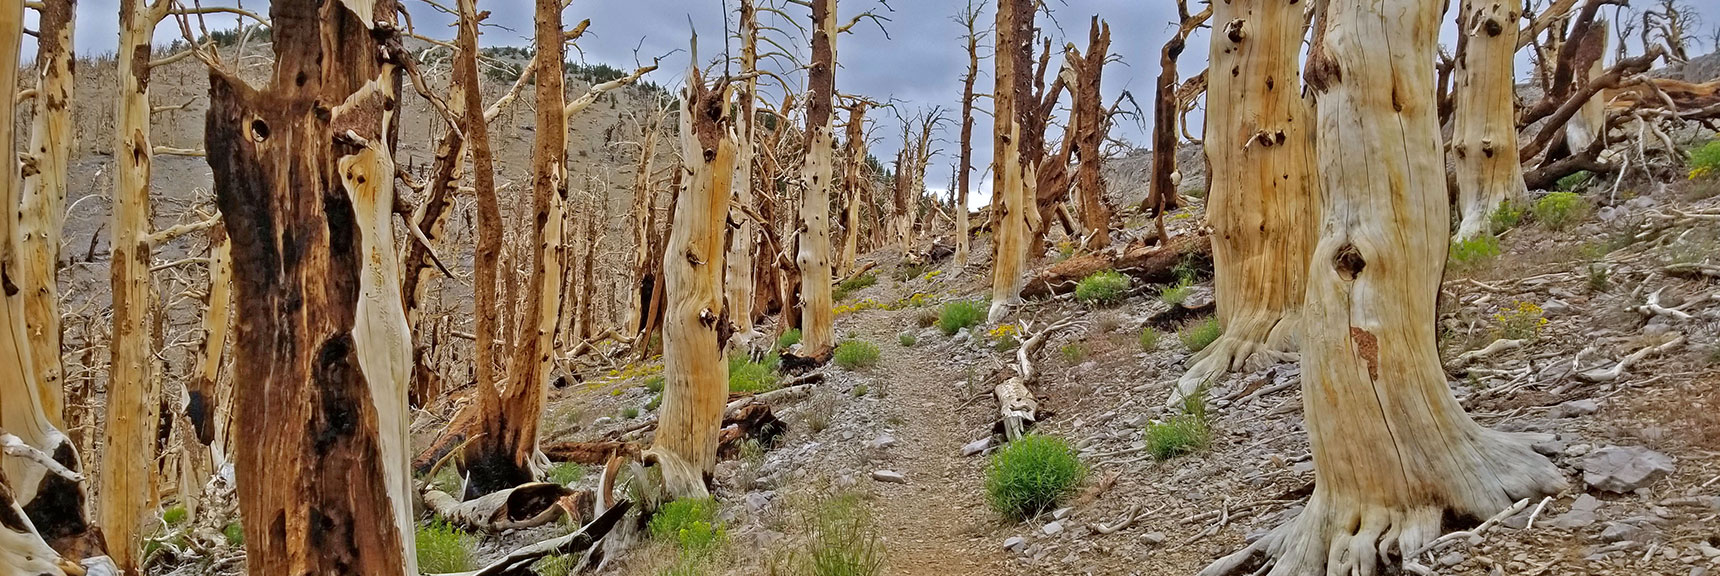 Ancient Trees Over 2000 Years Old Lost in a Moment. Wait 2000 Years for Return of Trees. | Lee and Charleston Peaks via Lee Canyon Mid Ridge | Mt Charleston Wilderness | Spring Mountains, Nevada